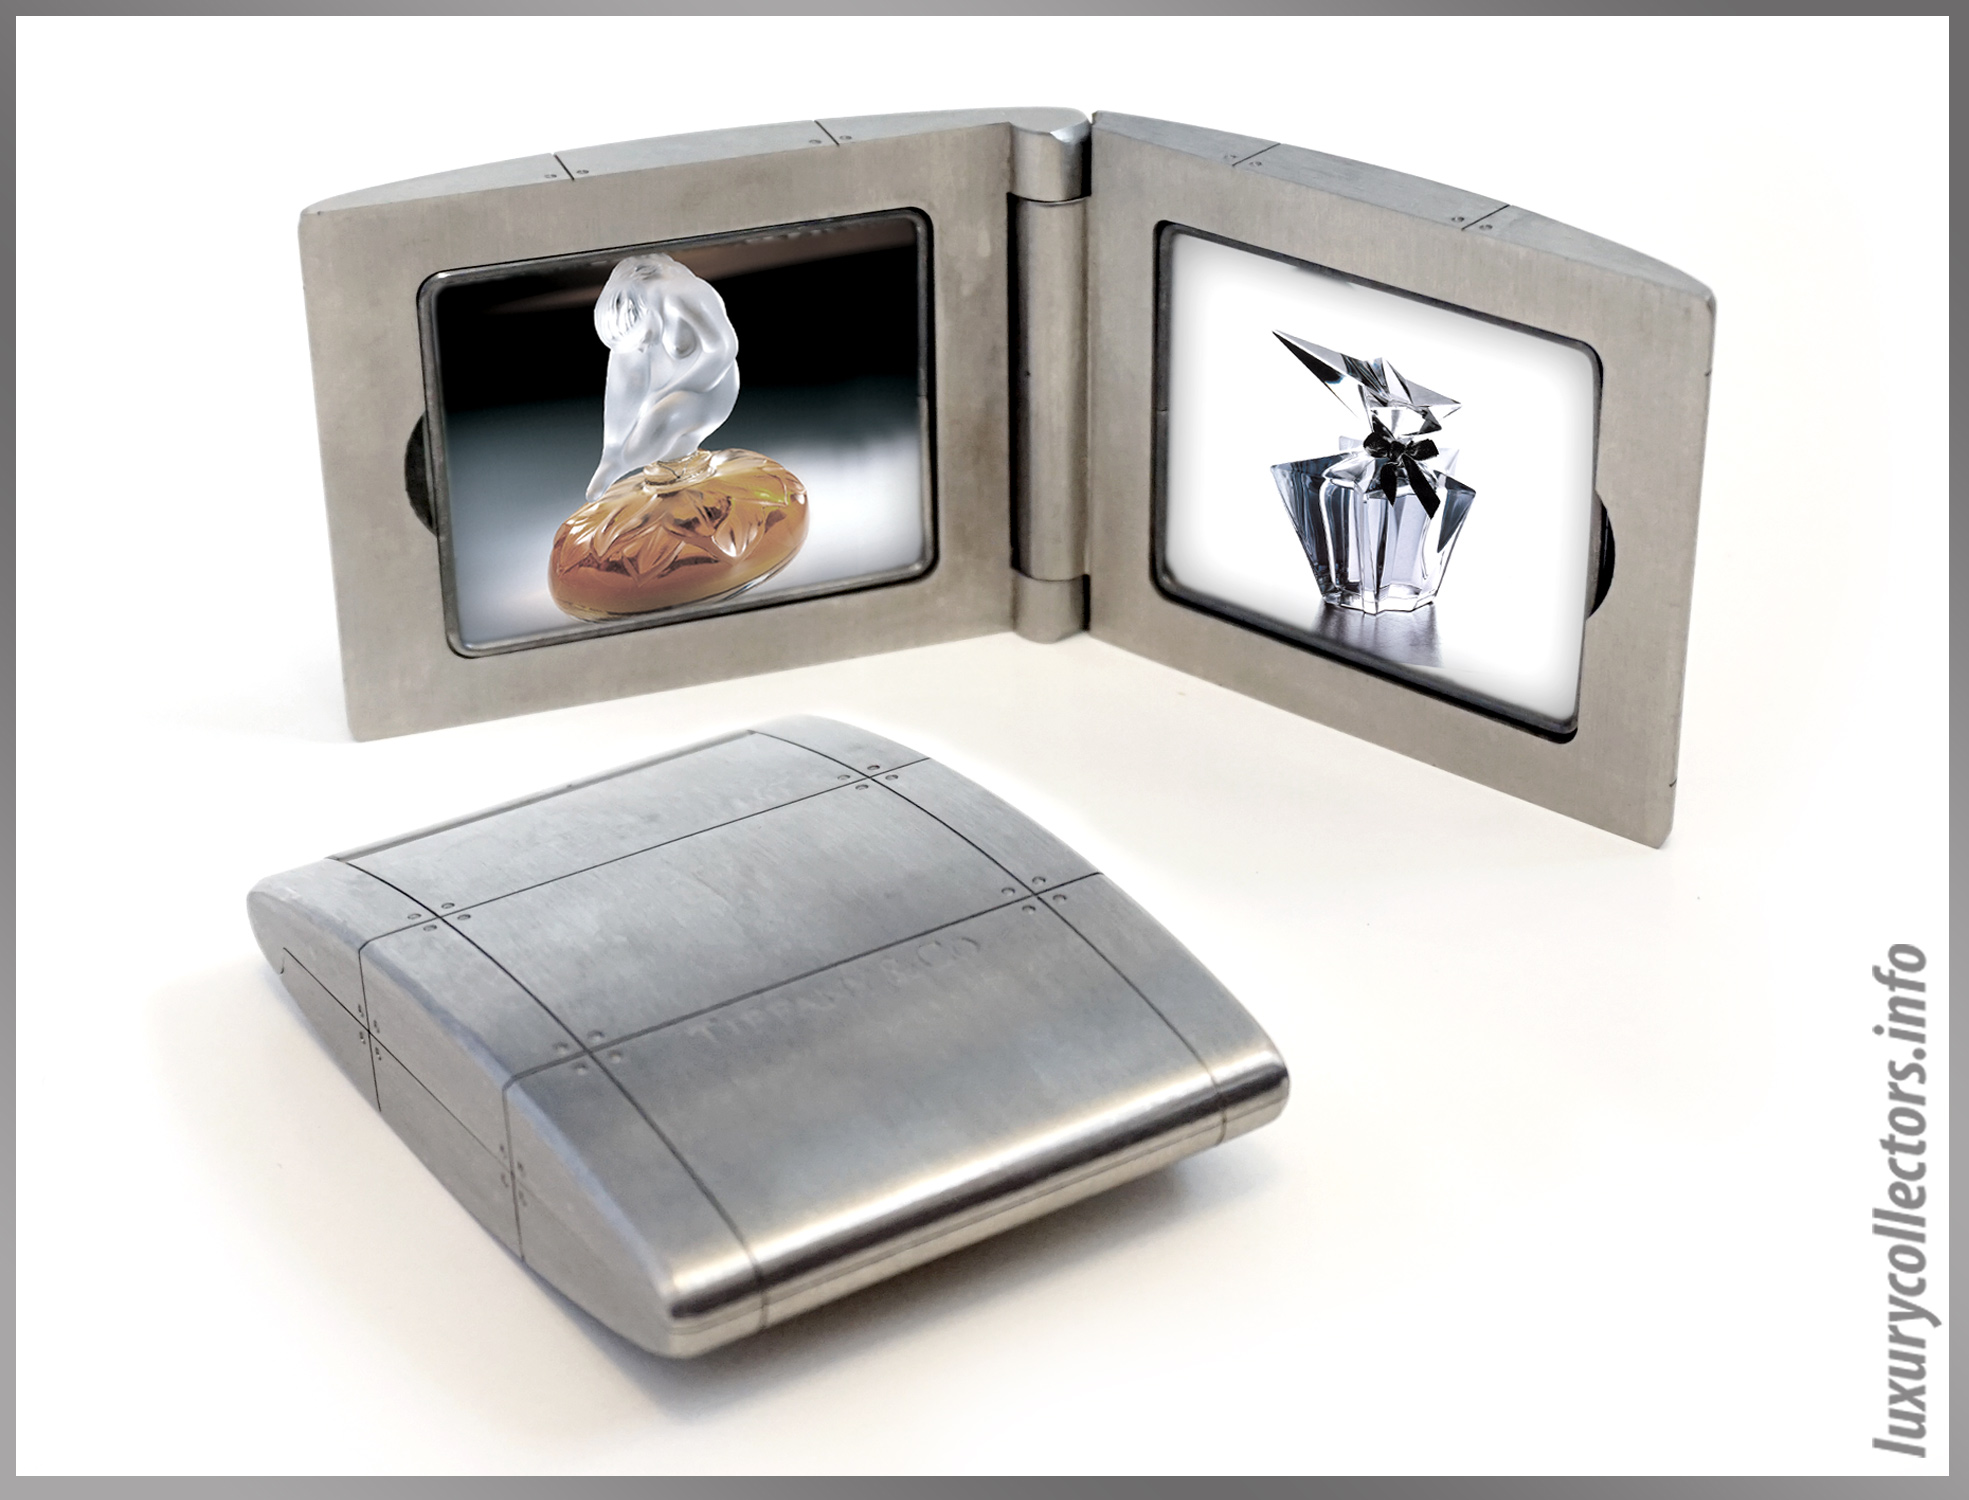 Opened Tiffany and & Co. Featured Image of Streamerica Metrozone Travel Fold Compact Photo Picture Frame in Stainless Steel